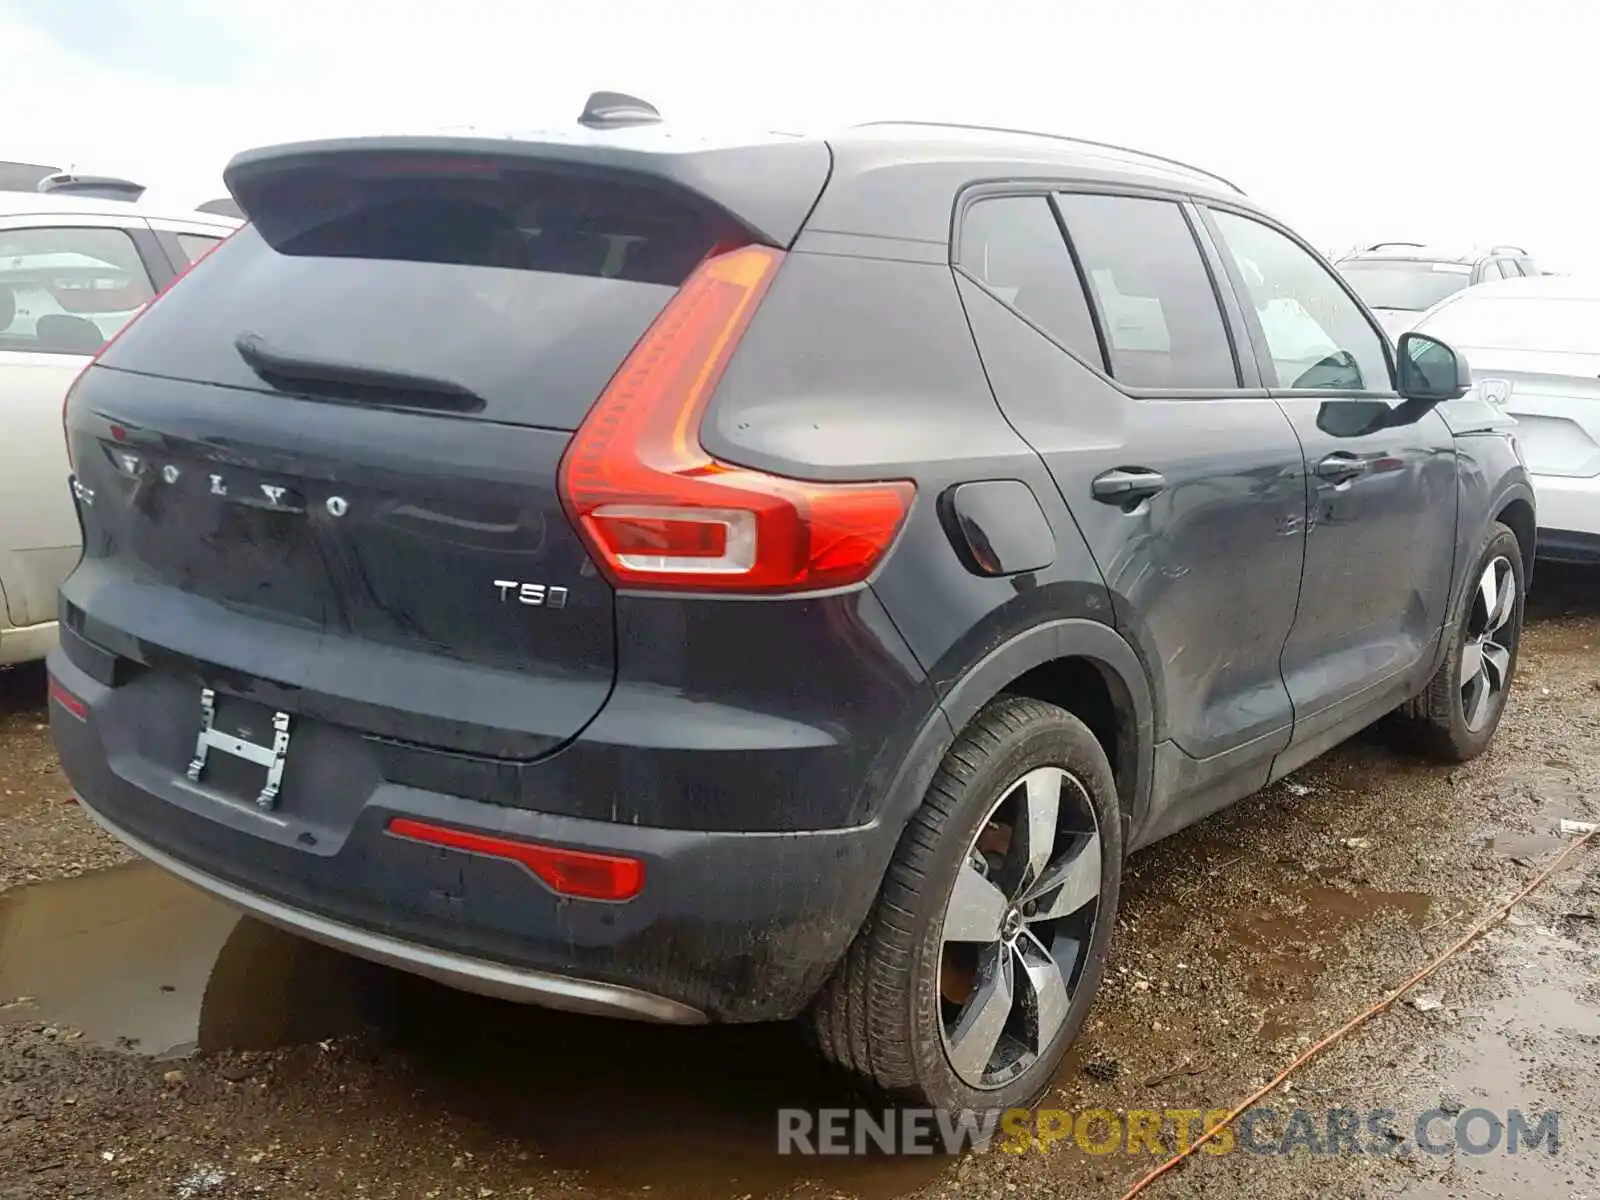 4 Photograph of a damaged car YV4162UK3K2053709 VOLVO XC40 T5 2019